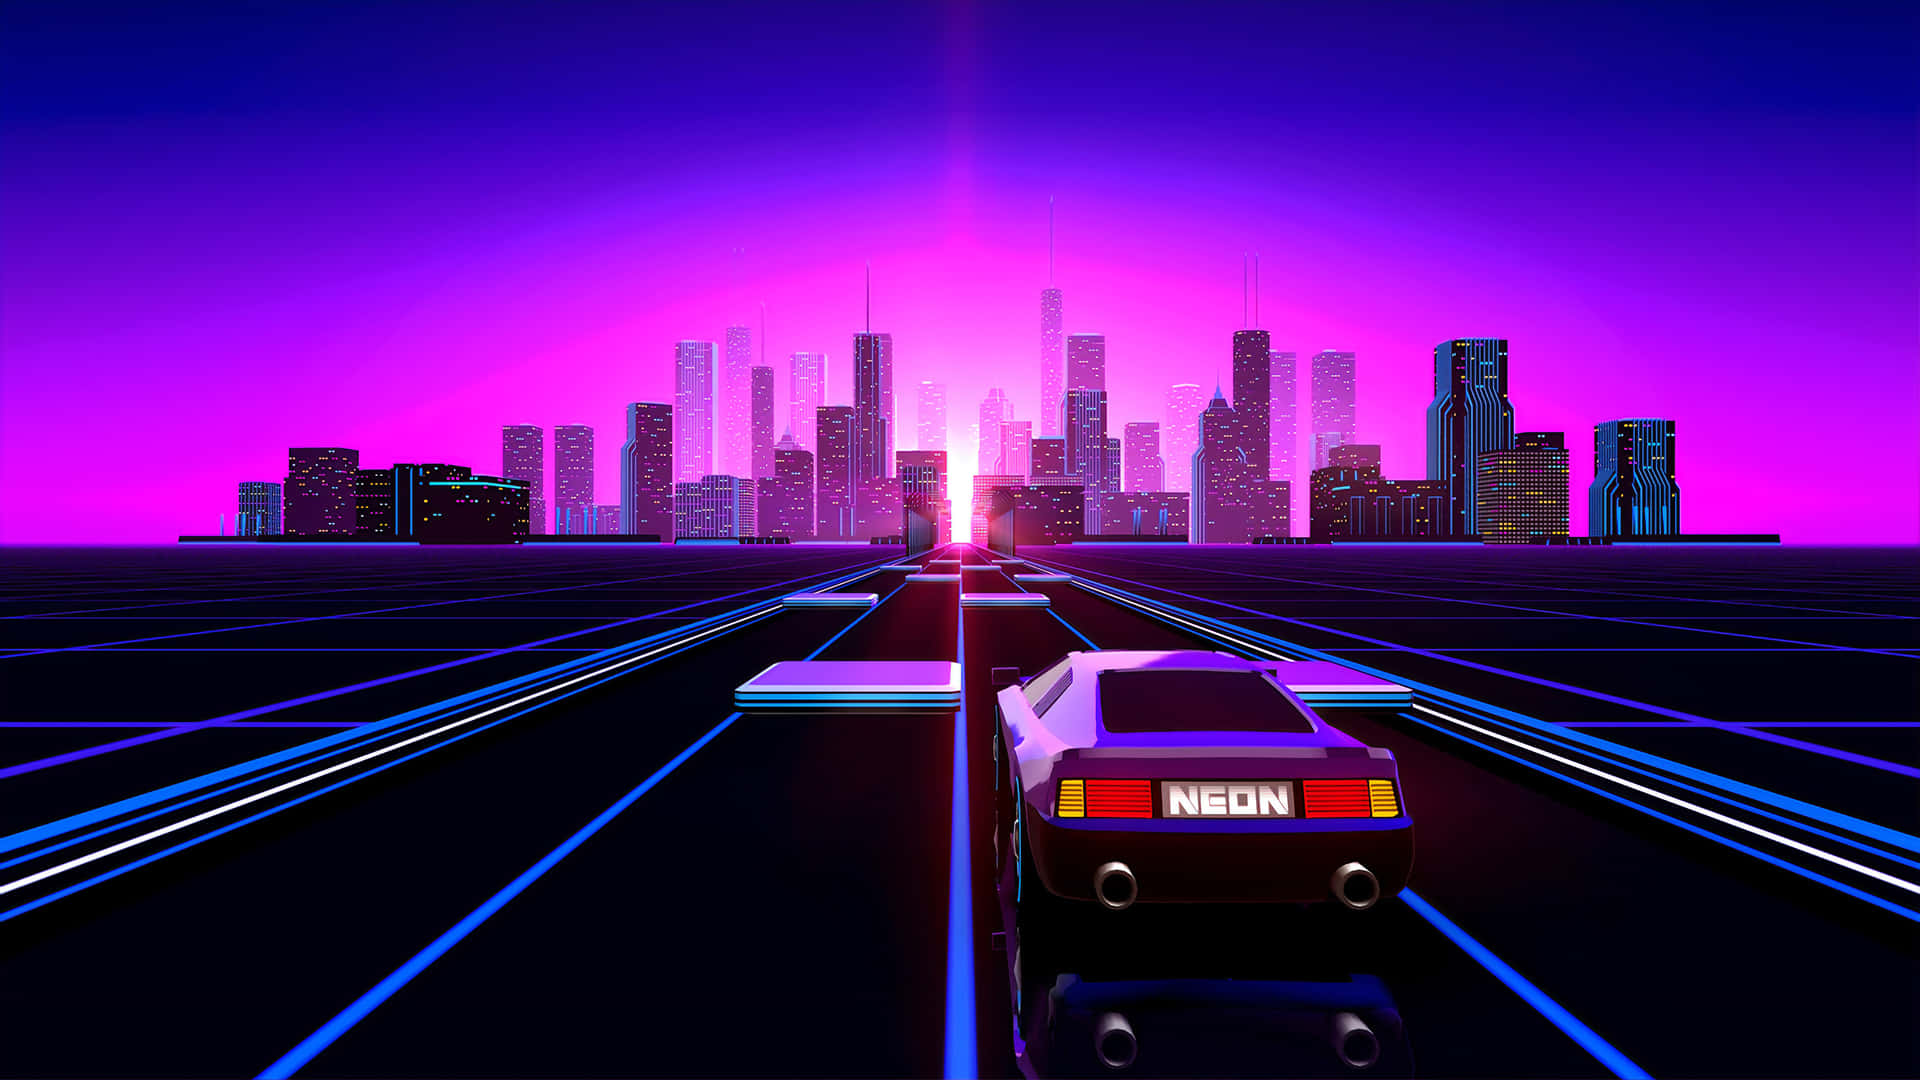 "Supercharged and stylish, the sleek look of Retrowave style is here to stay."